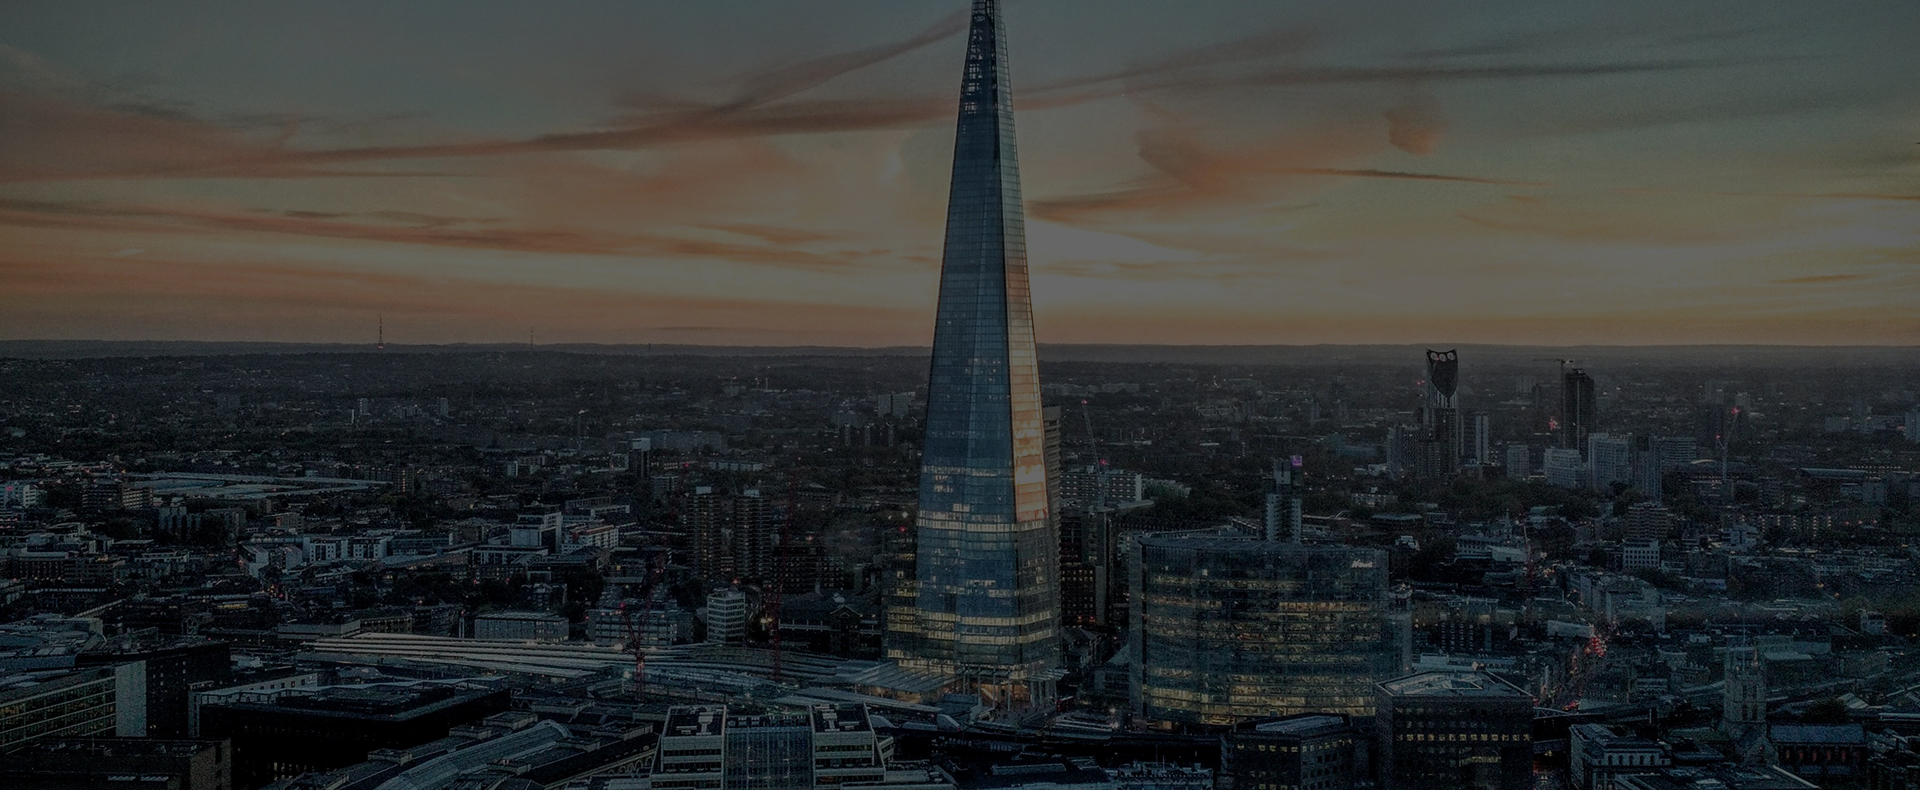 An aerial view of the shard lit up at night, surrounded by smaller buildings in London.